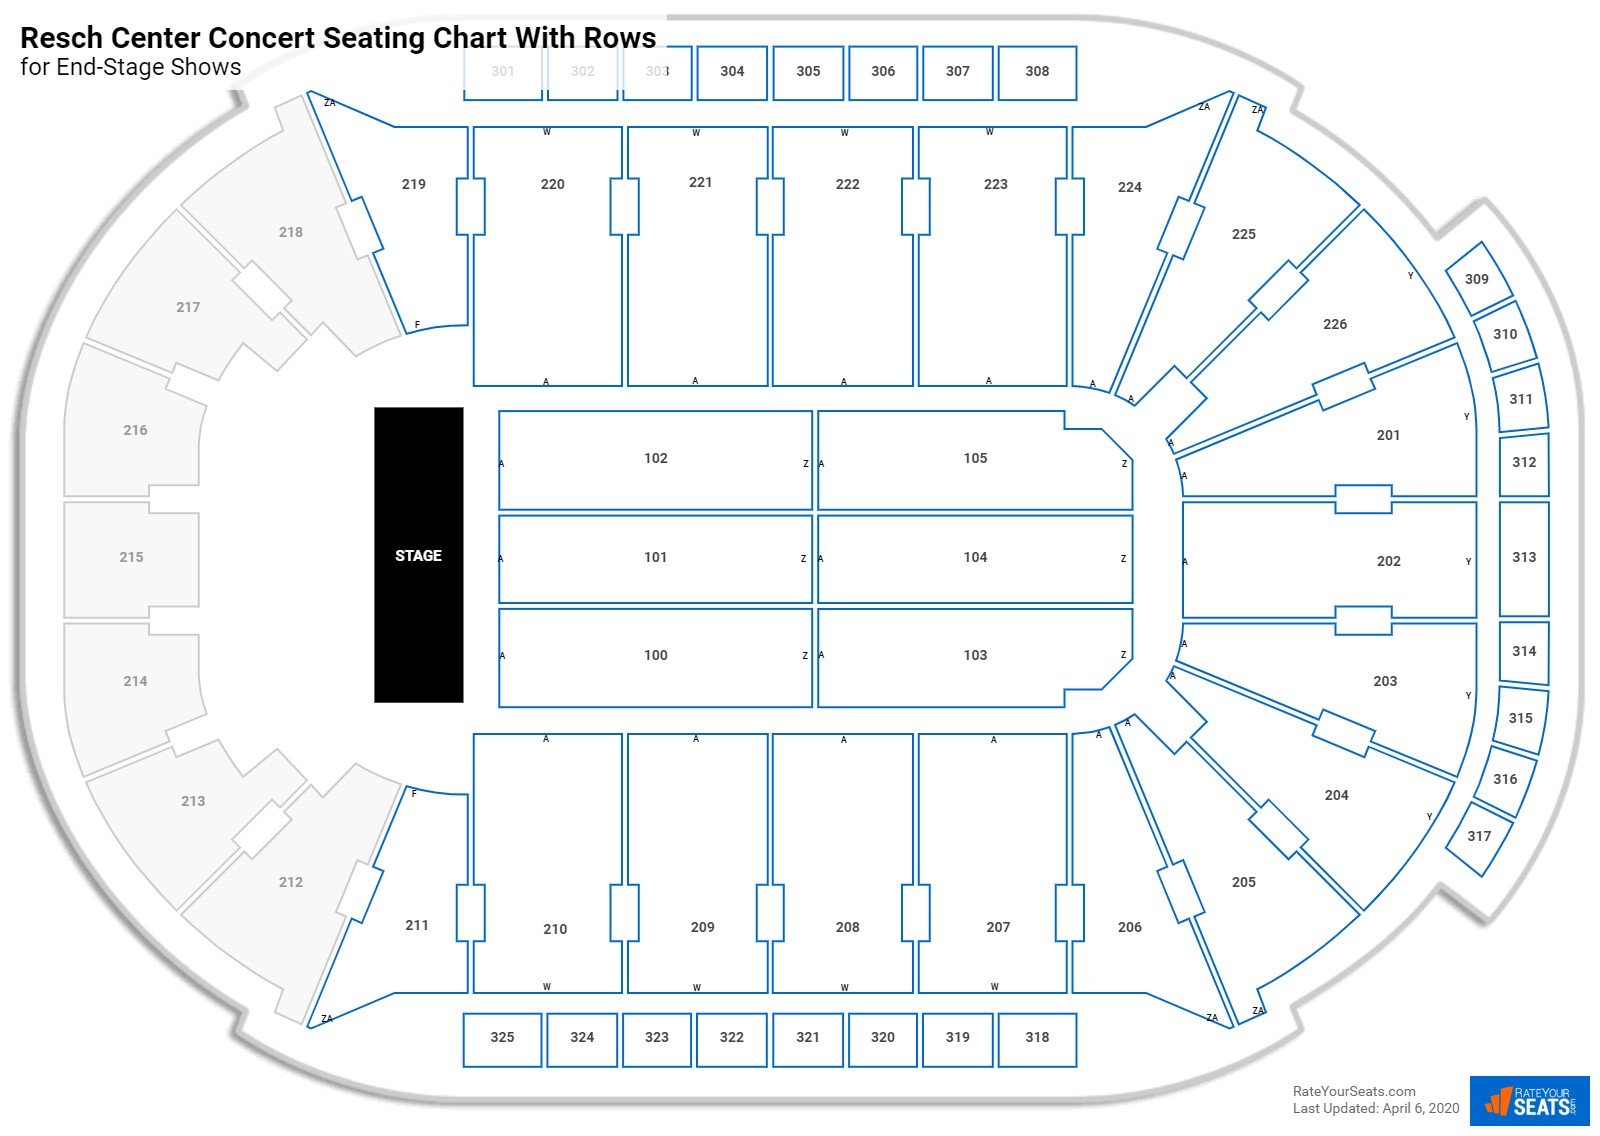 Resch Center seating chart with row numbers